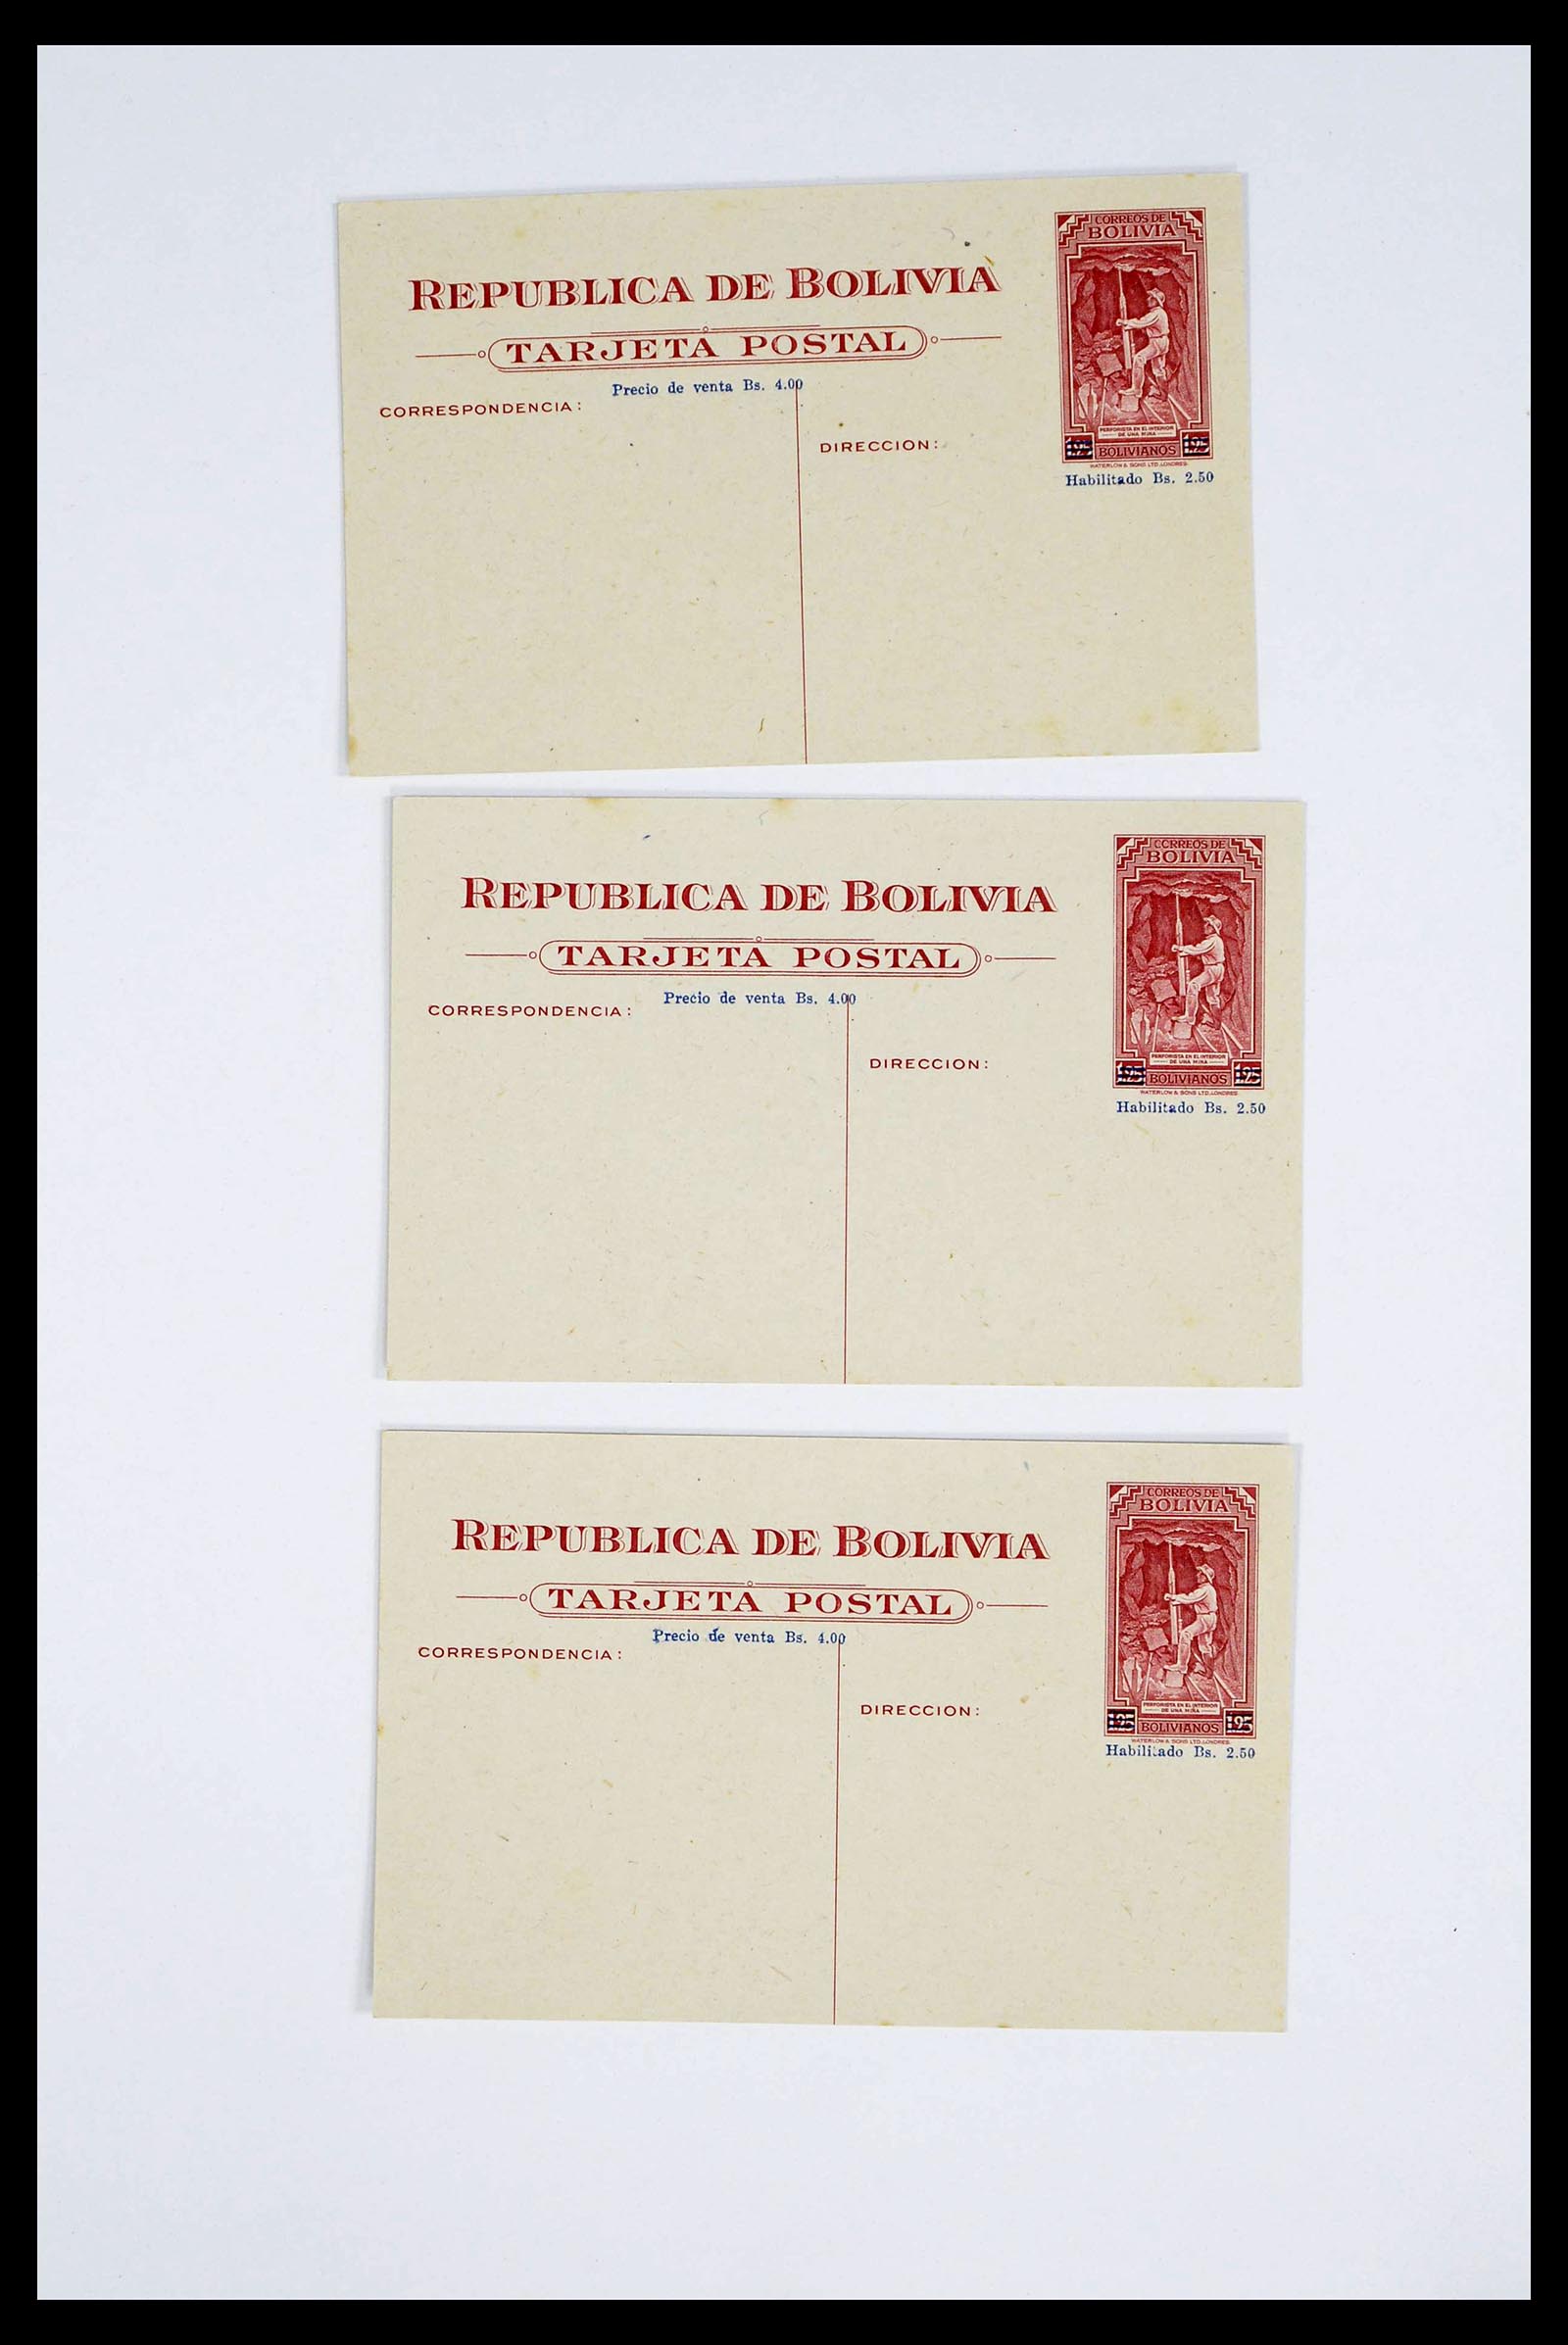 39271 0035 - Stamp collection 39271 Bolivia covers 1950-1980.